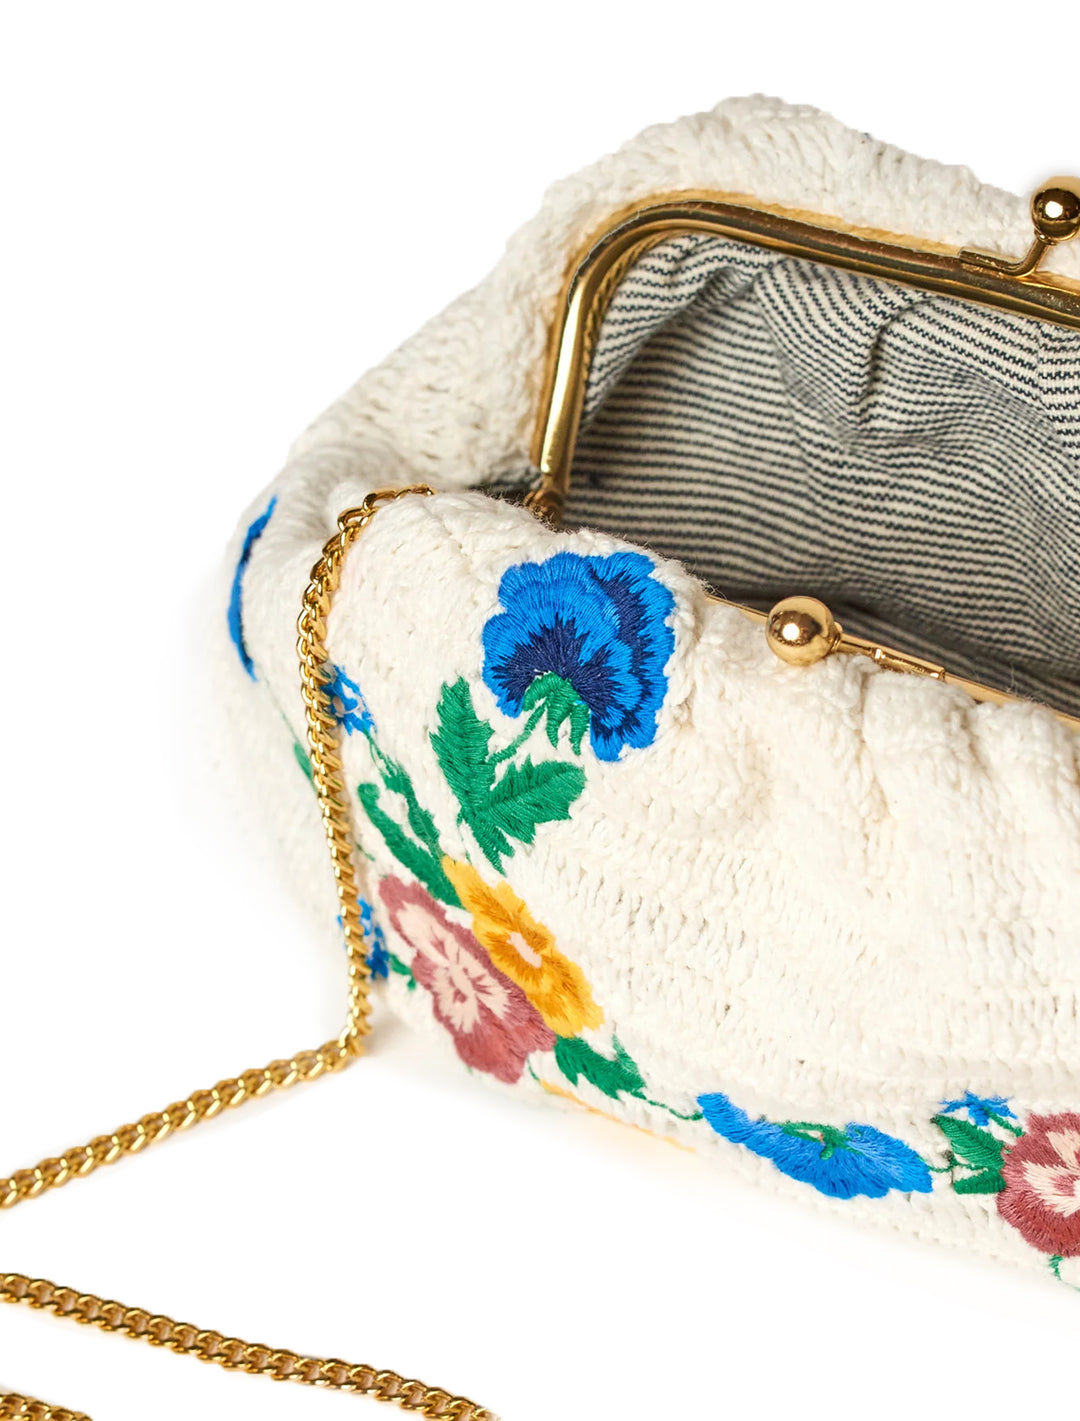 Close-up view of M.A.B.E.'s vela embroidered crochet clutch.